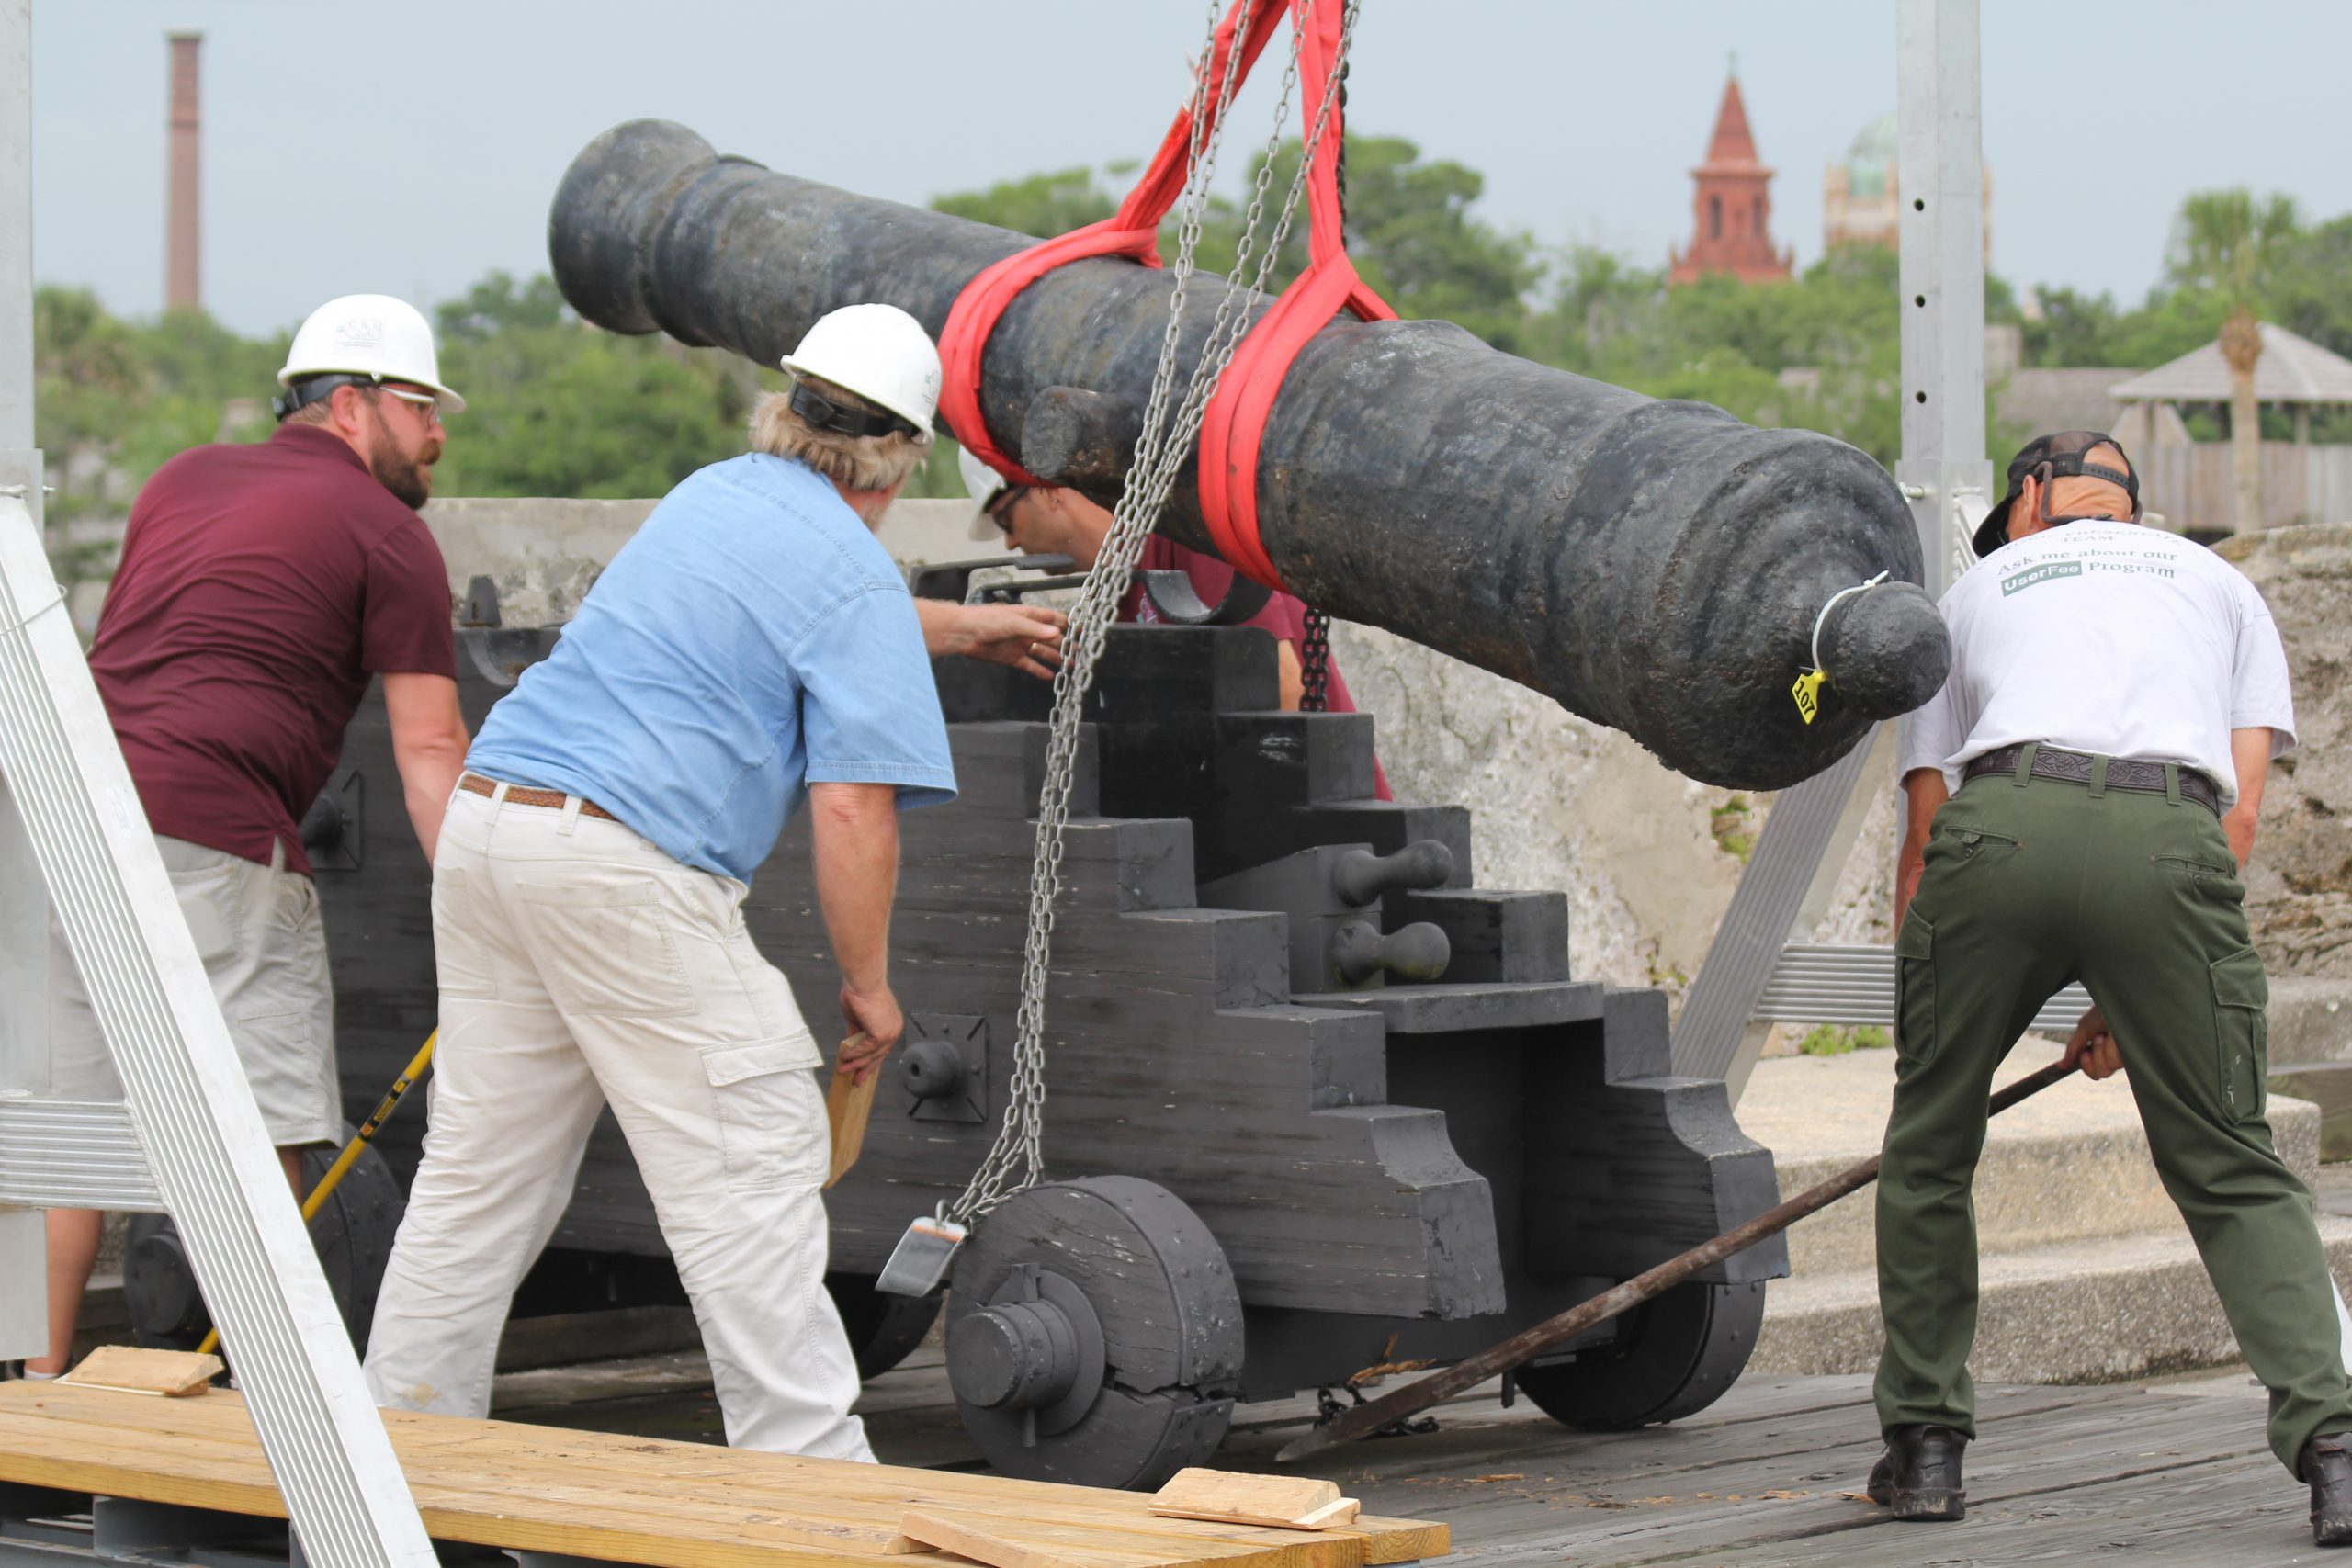 removing a cannon using a chain hoist and gantry